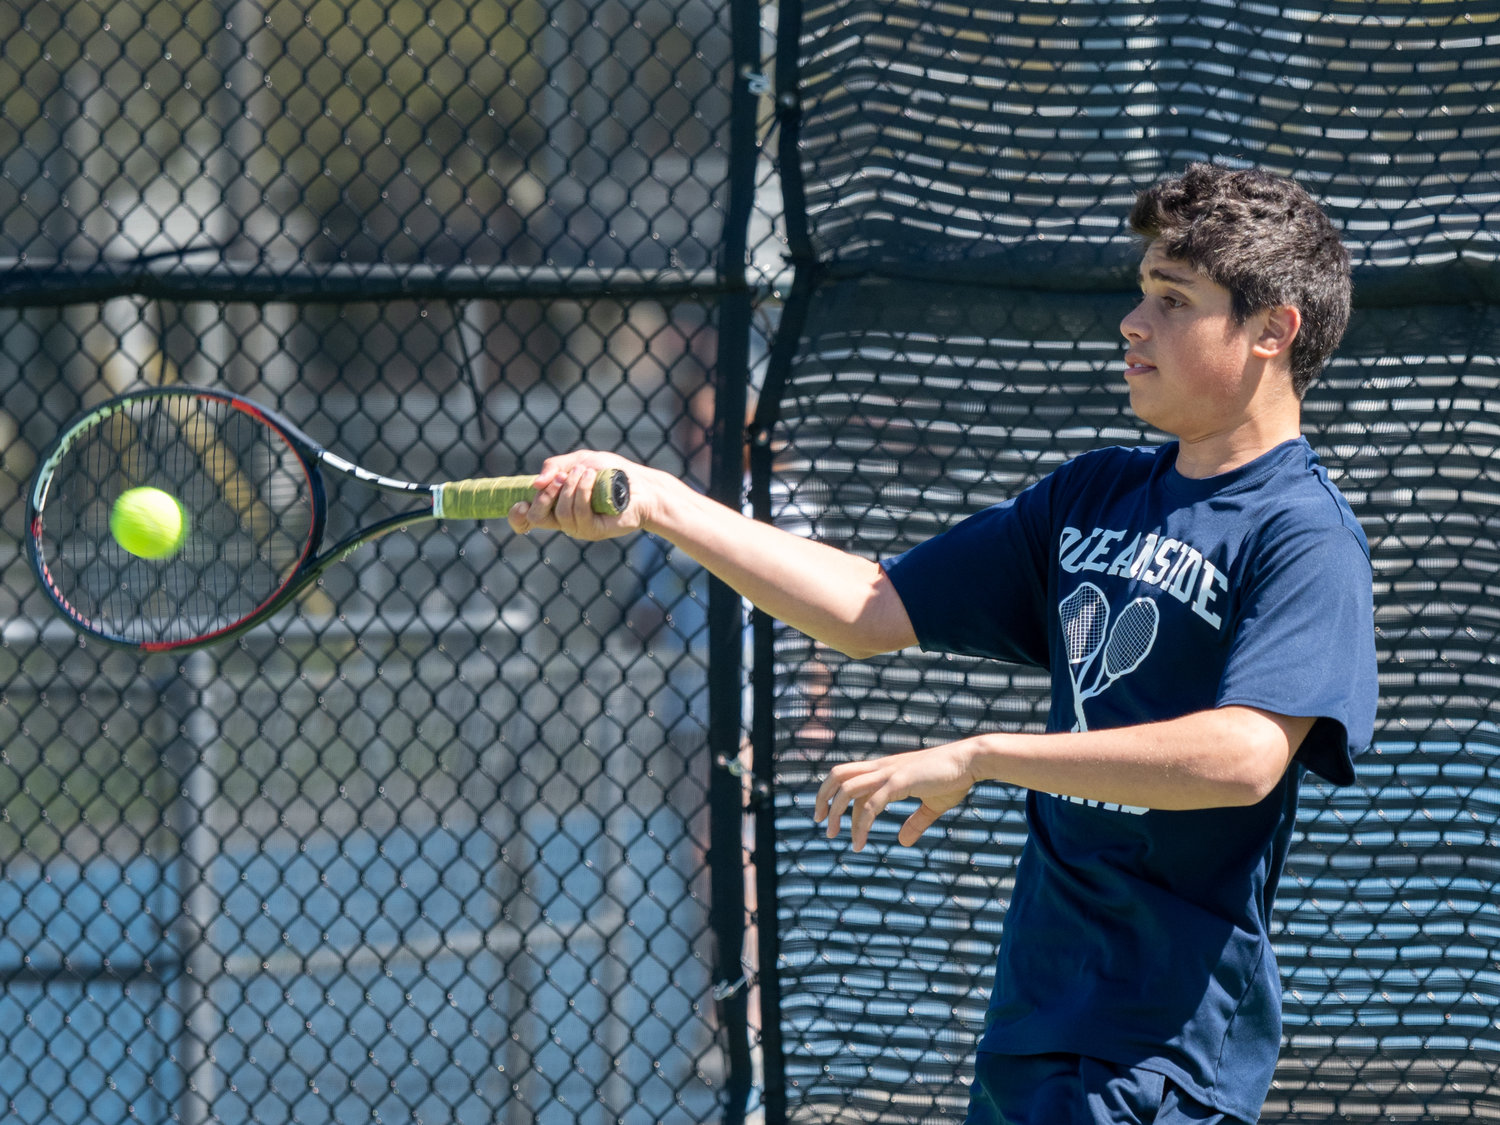 Senior Spencer Roth returned as Oceanside’s No. 1 singles player and won 10 of 13 matches with one remaining in the regular season.